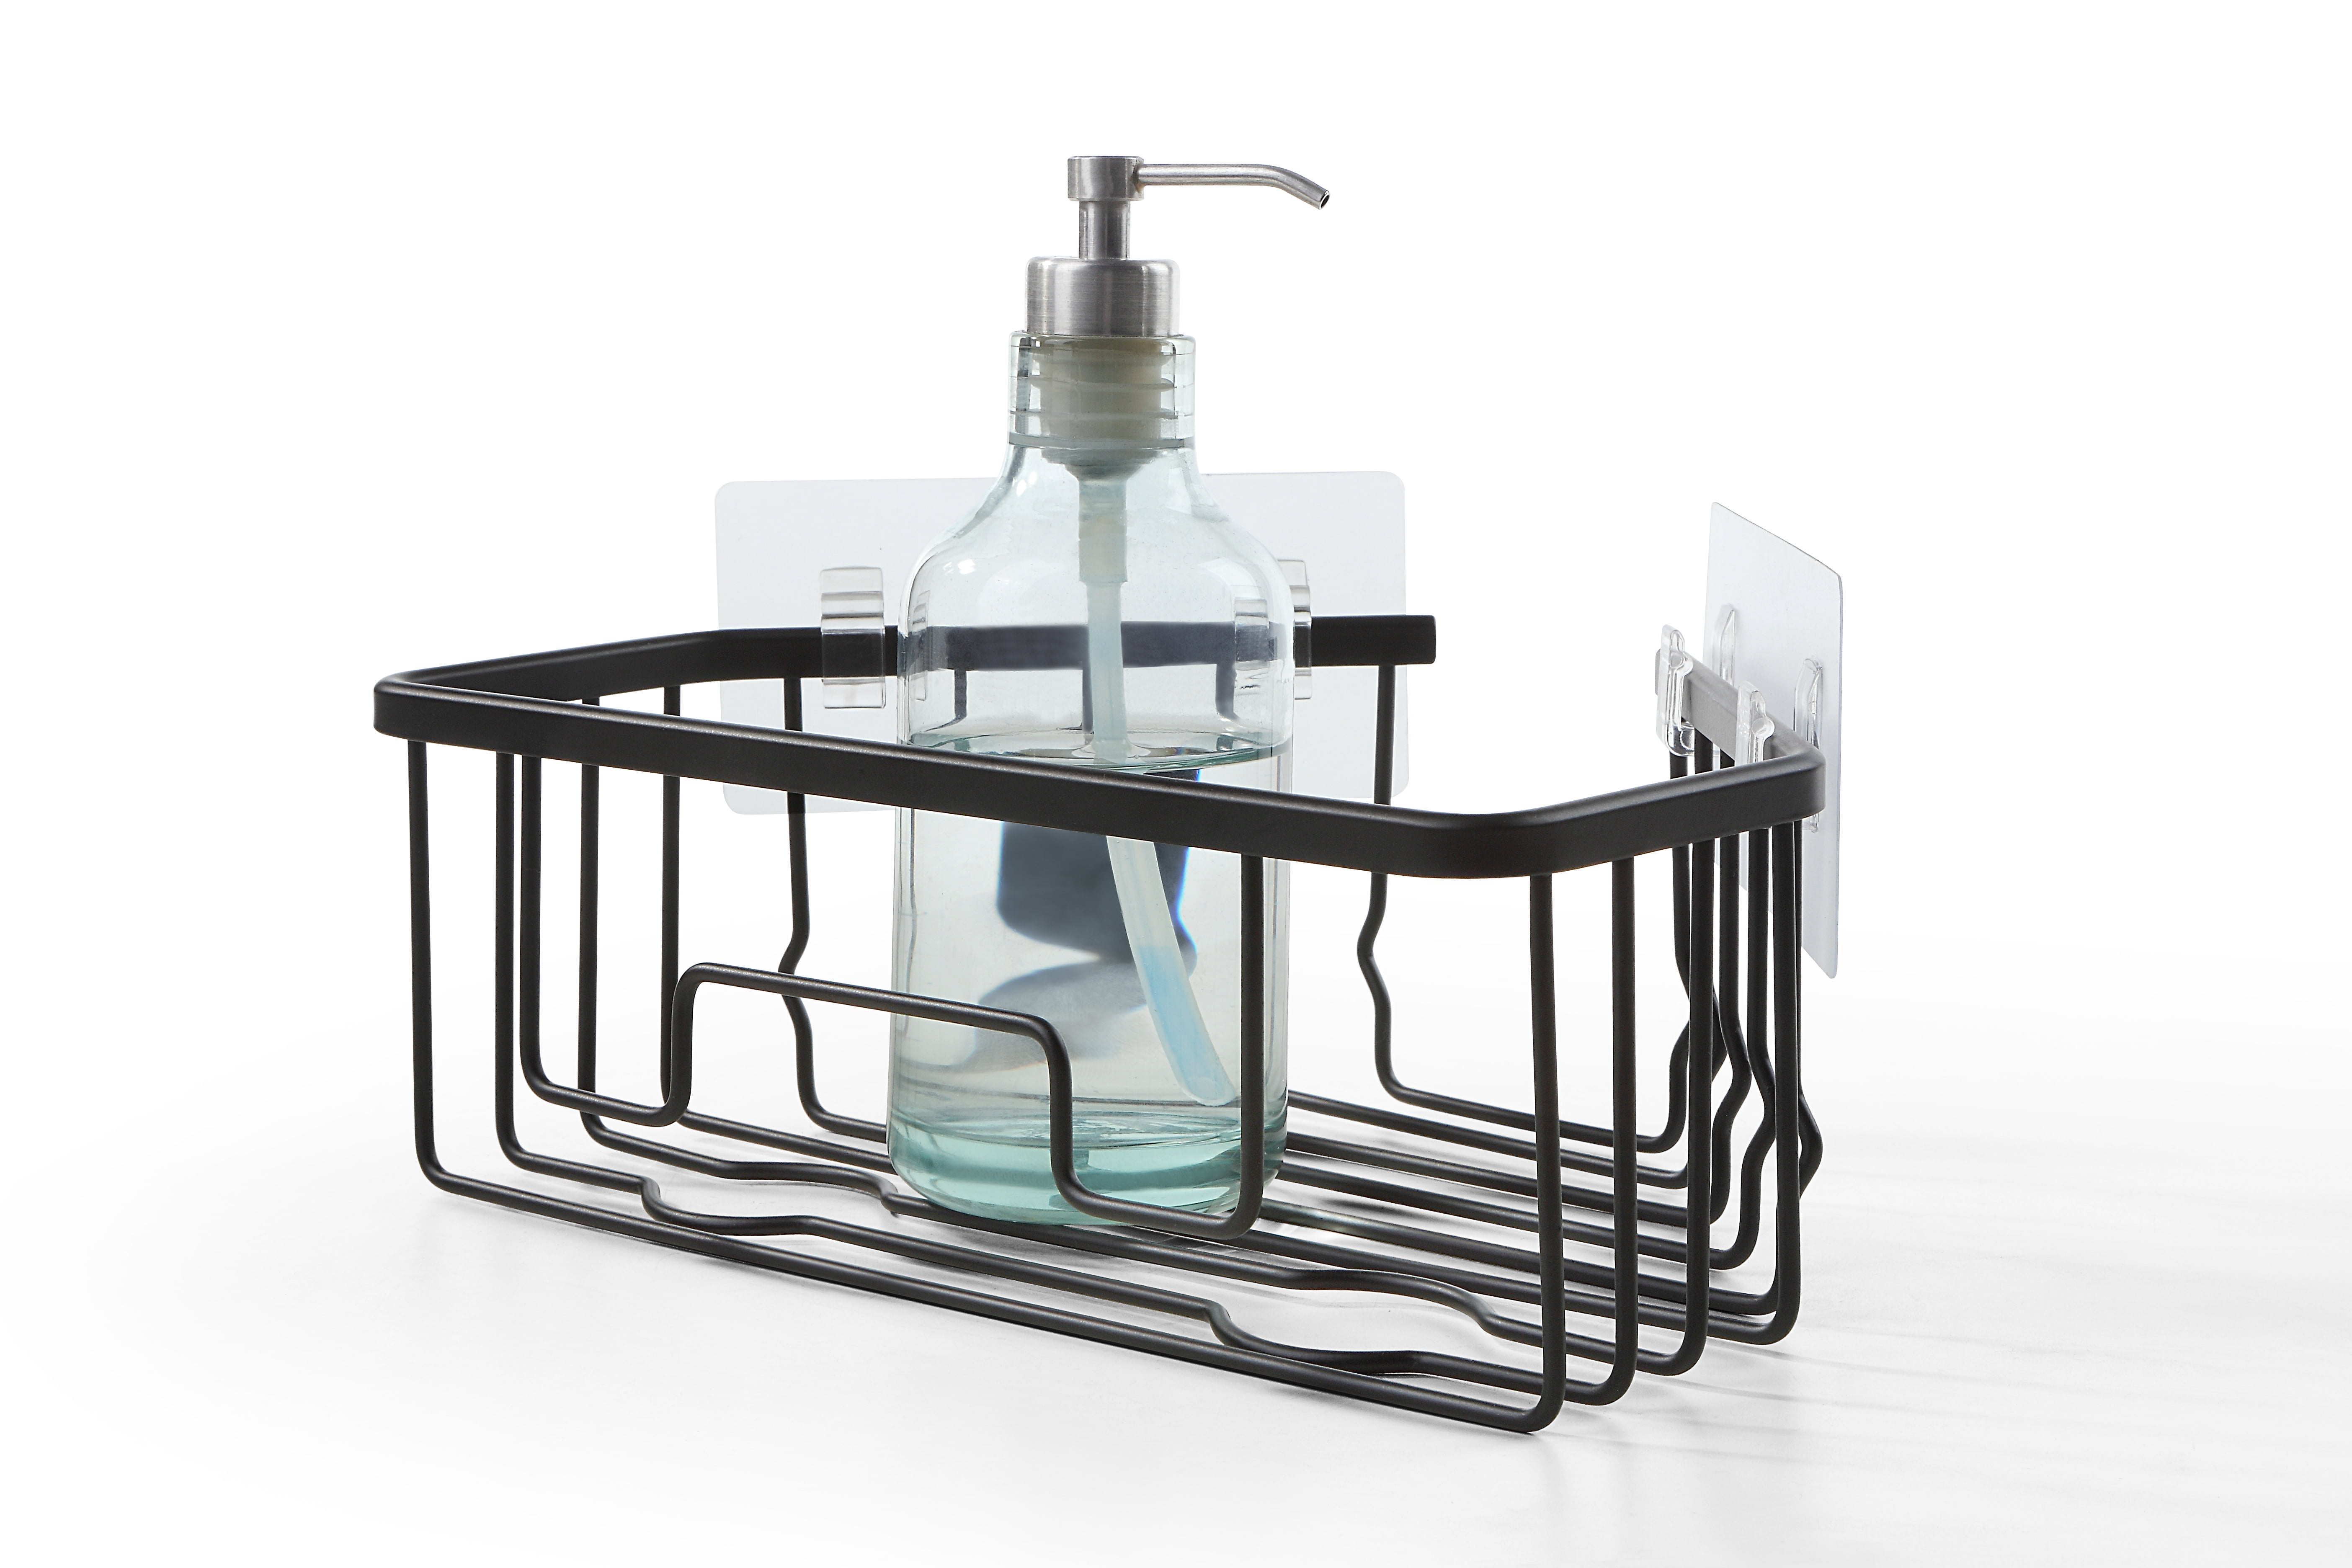 SunnyPoint RustProof Aluminum Wall Mount Shower Caddy Basket Shelf;  Adhesive Hook Pad Included